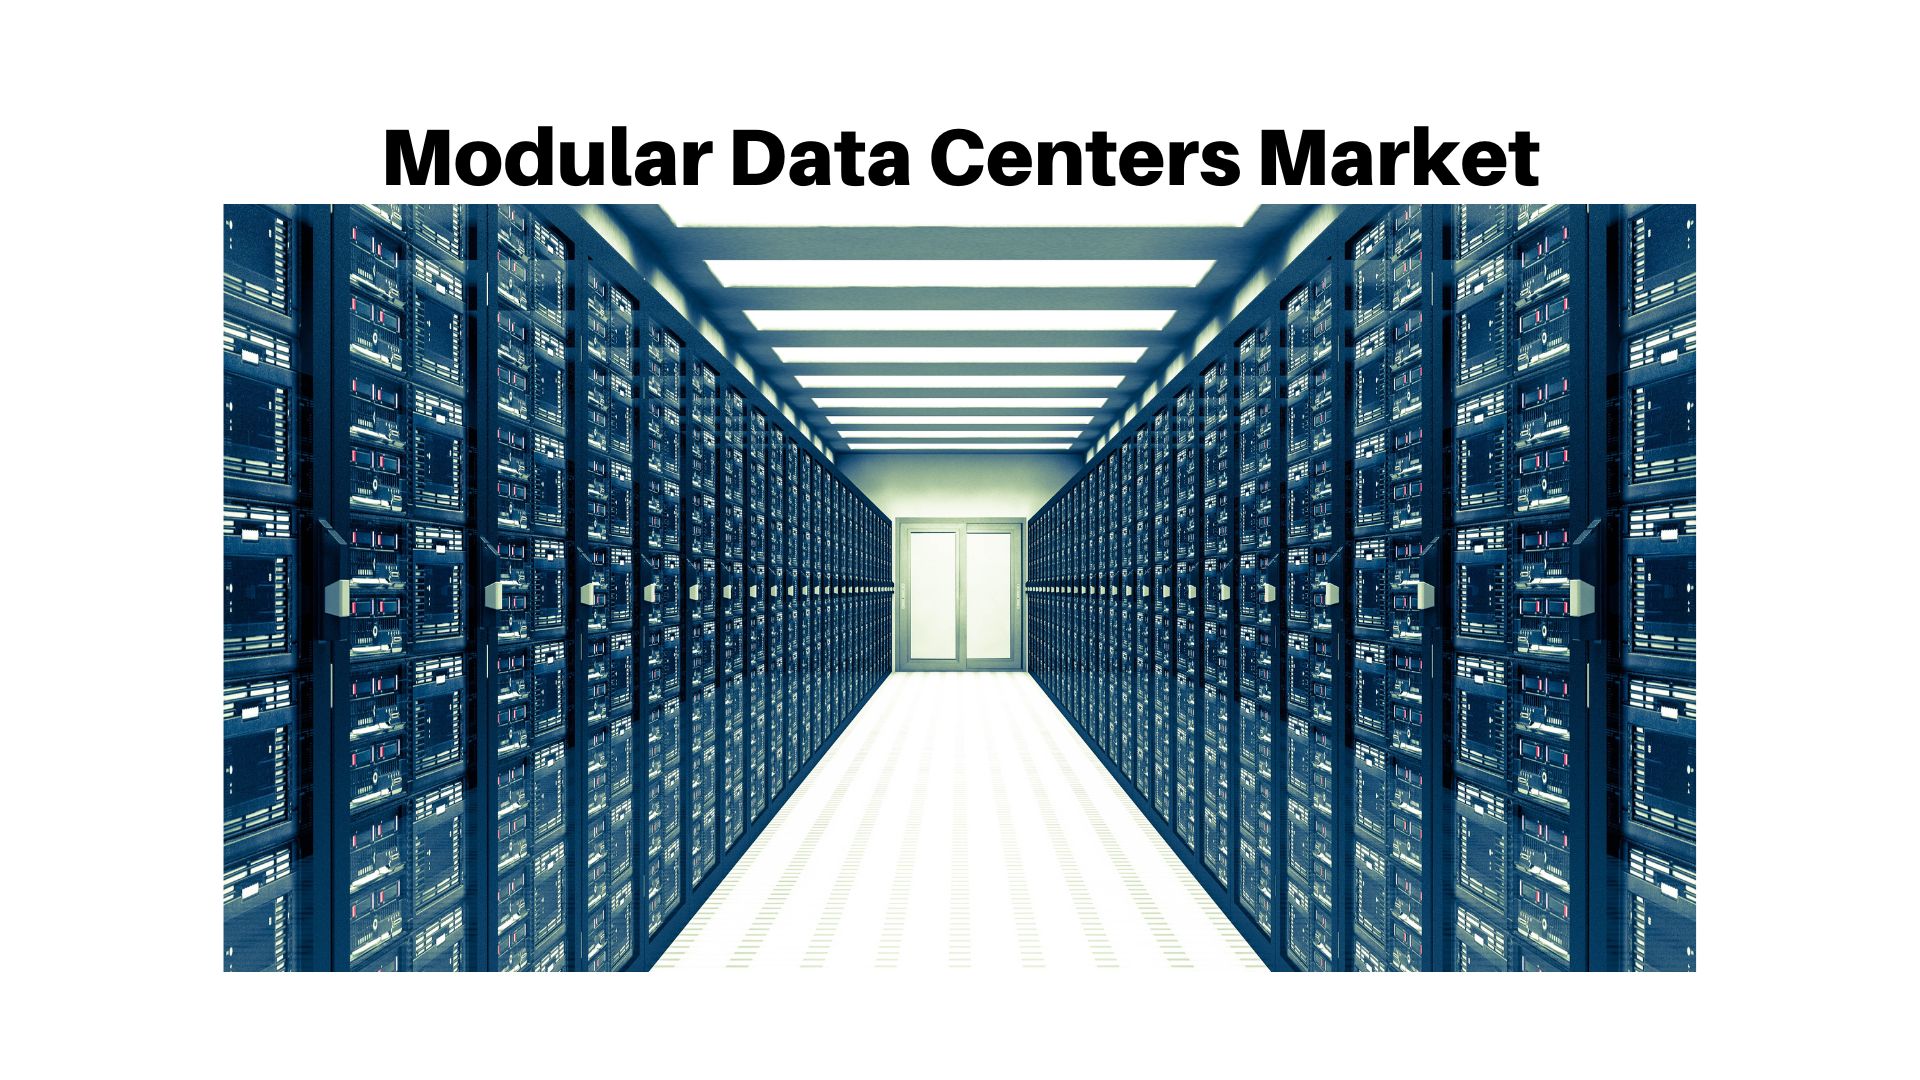 Global Modular Data Centers Market Size Expected To Reach 155.09 Billion By 2033, At CAGR of 19.3%